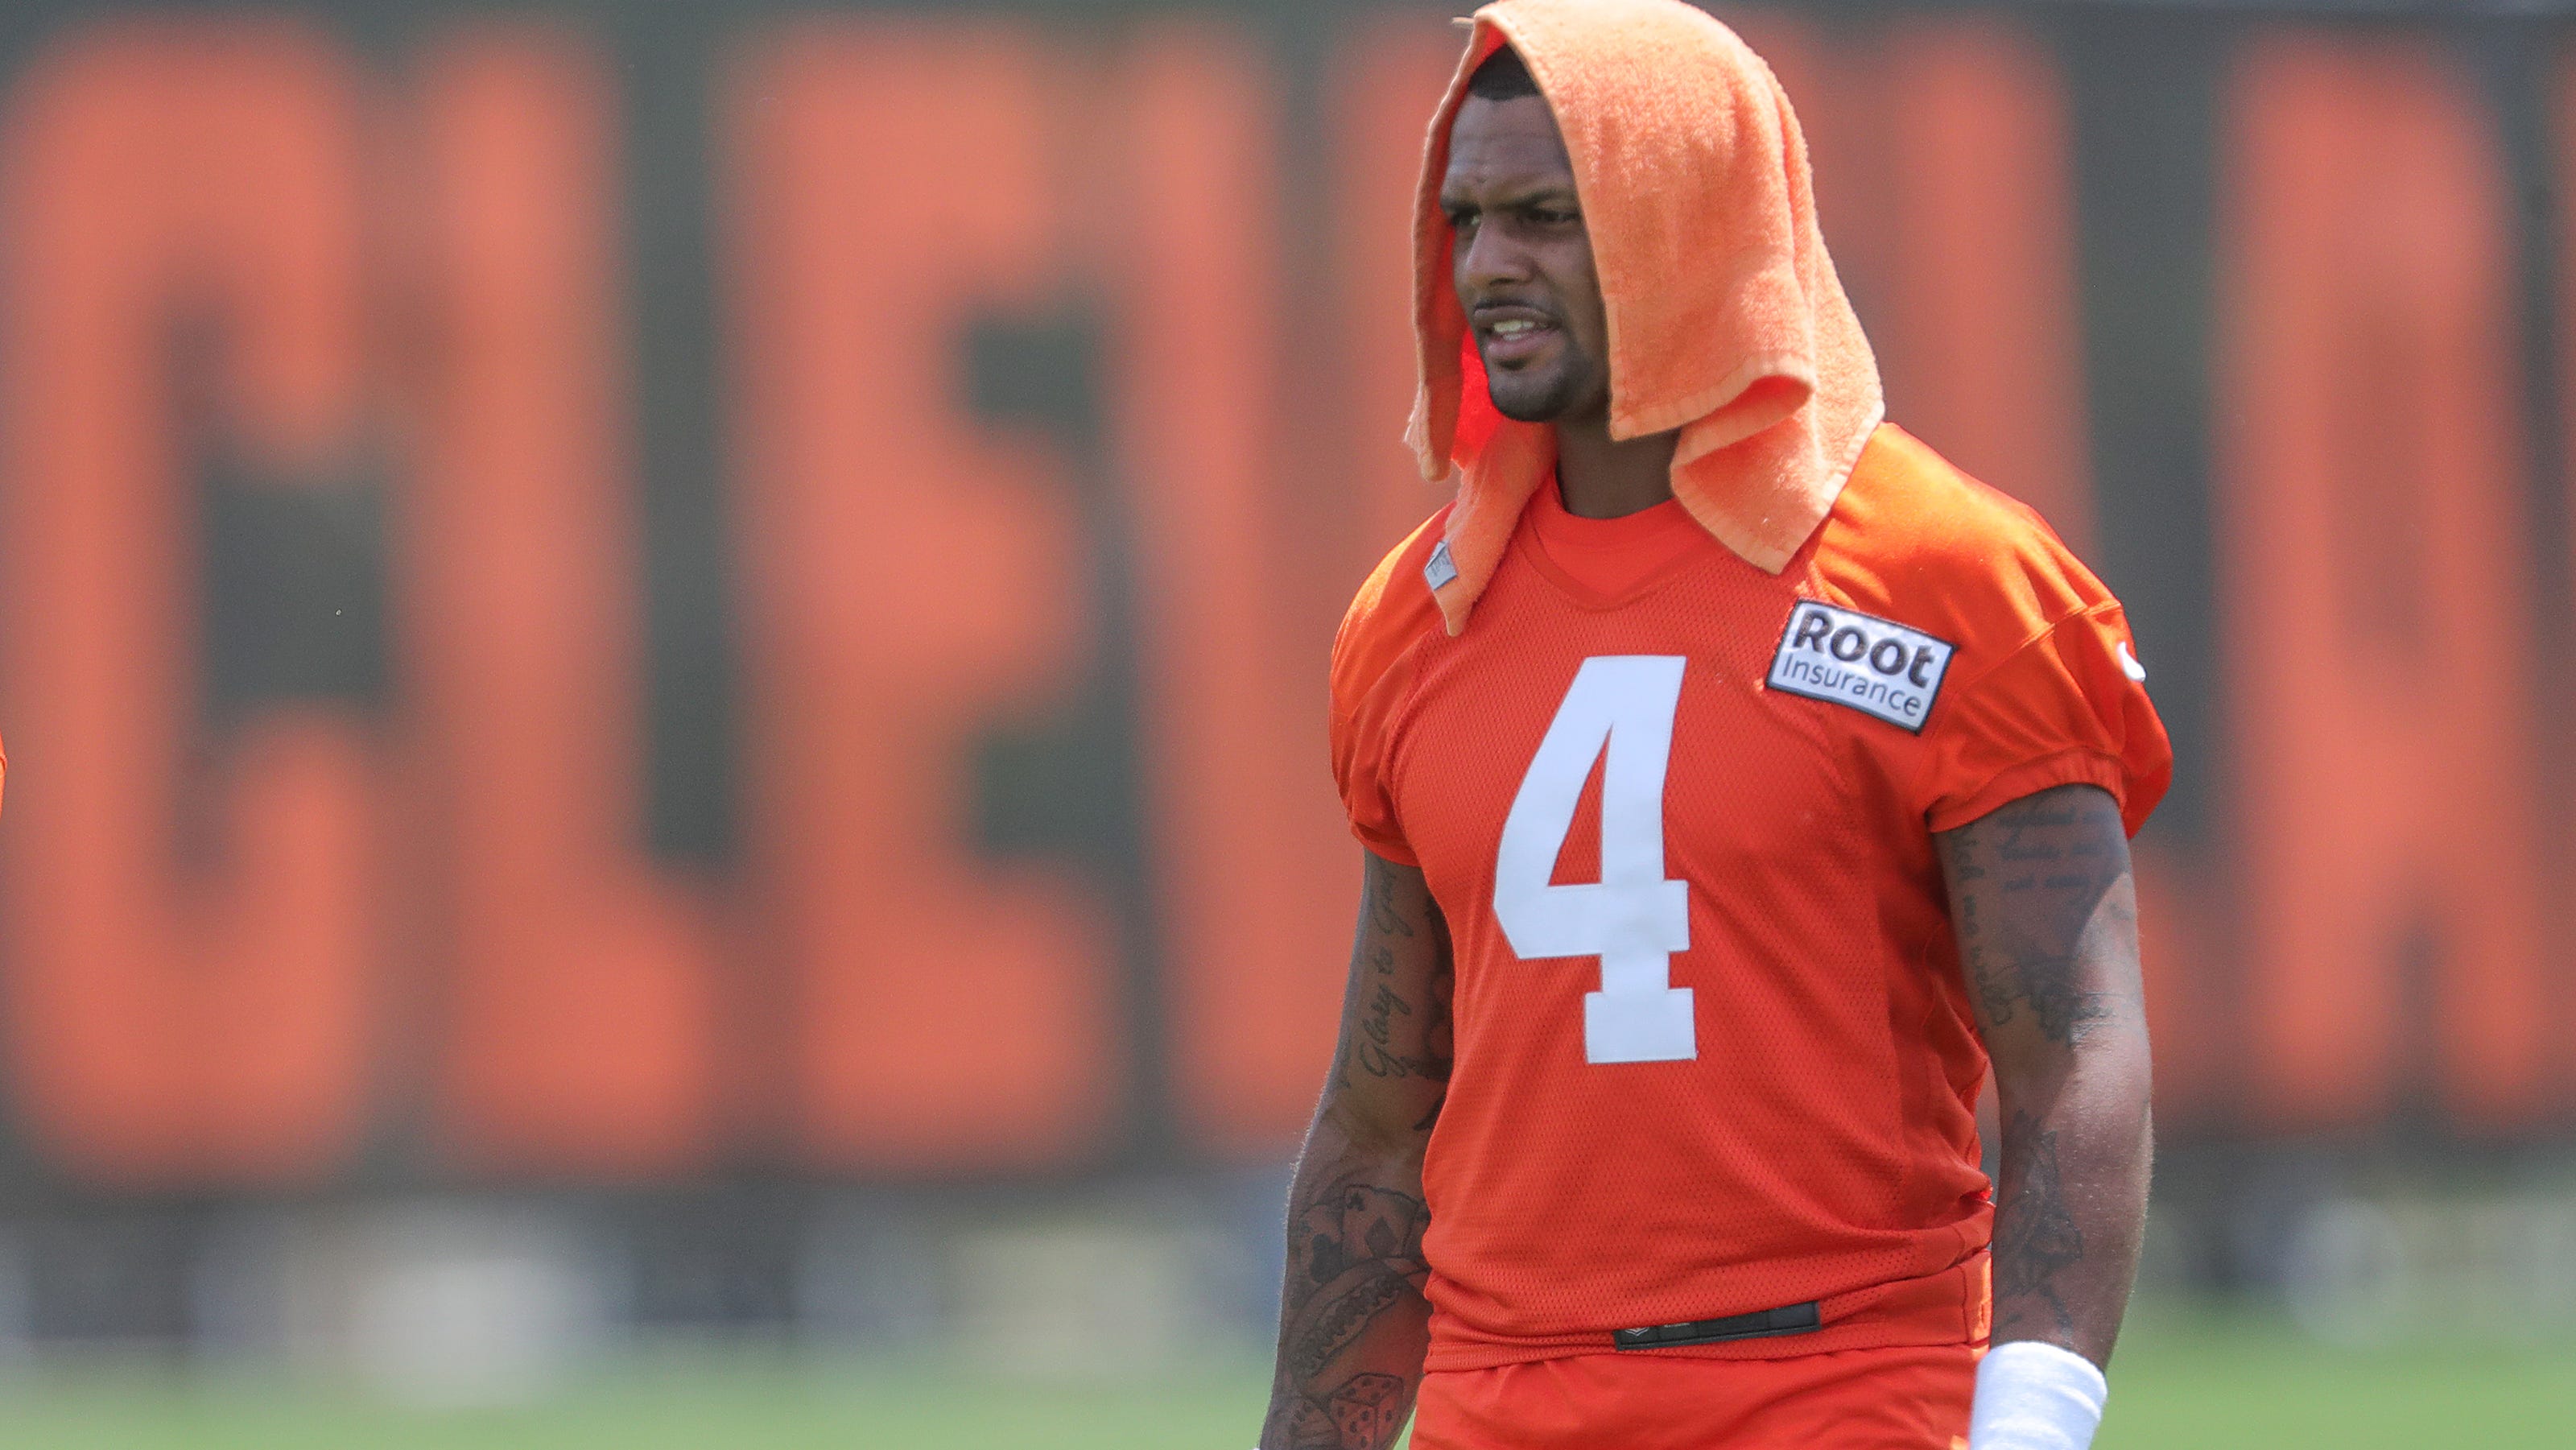 Browns get lucky that Deshaun Watson's suspension is only six games | Opinion